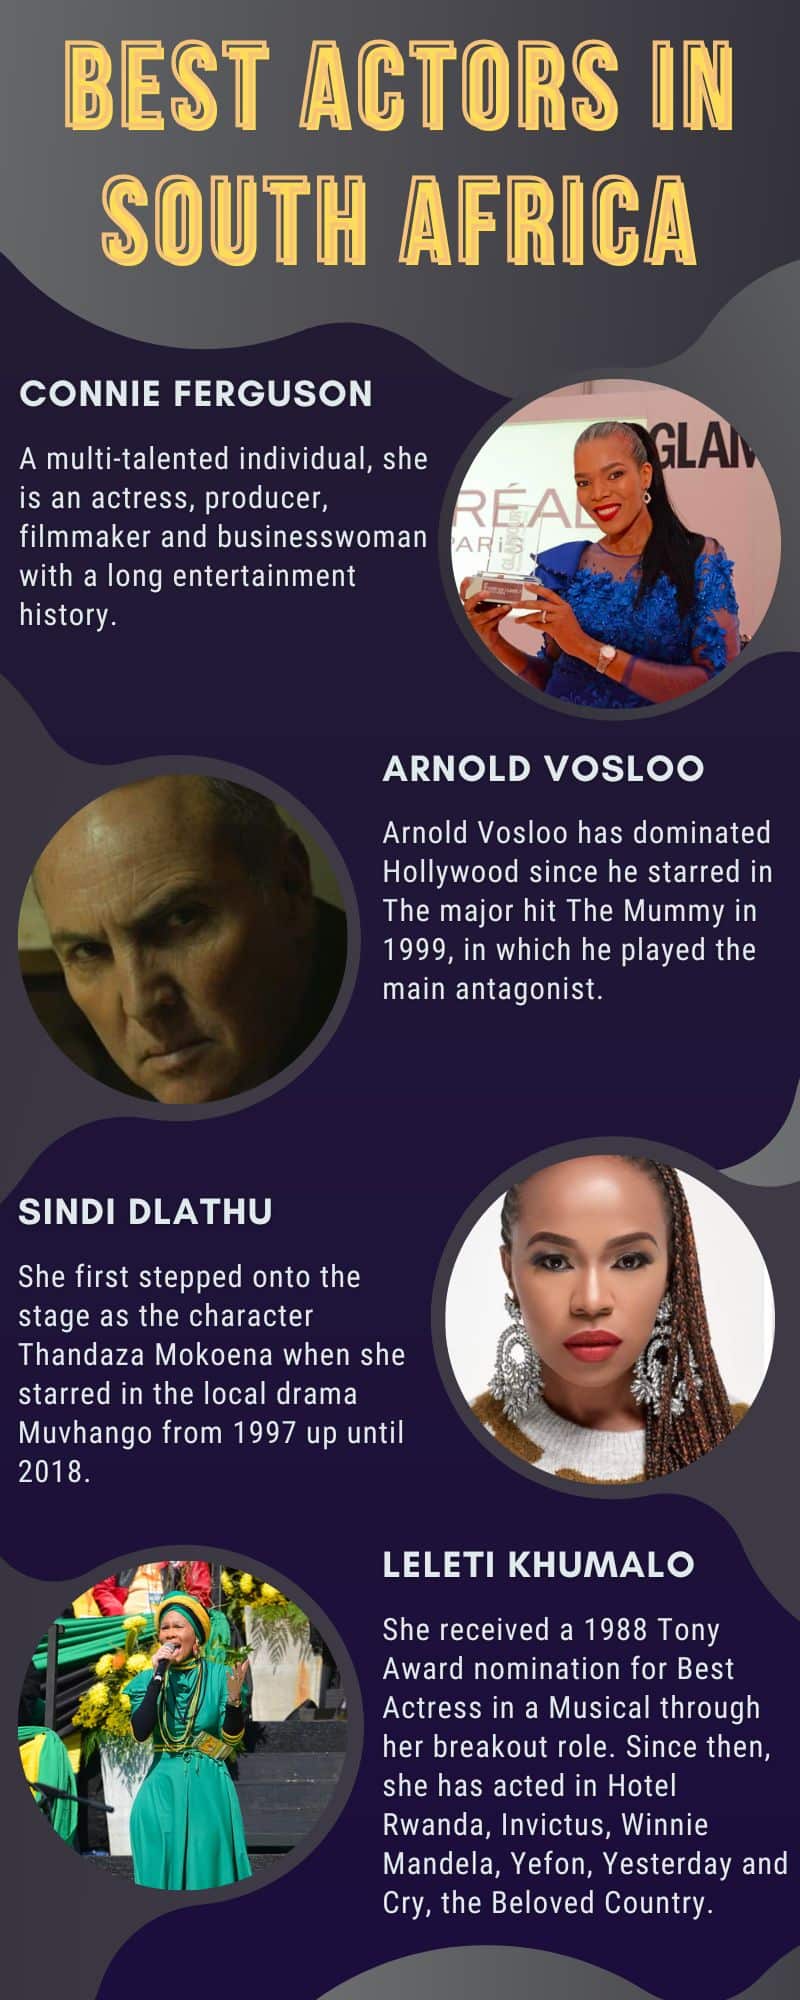 Best actors in South Africa